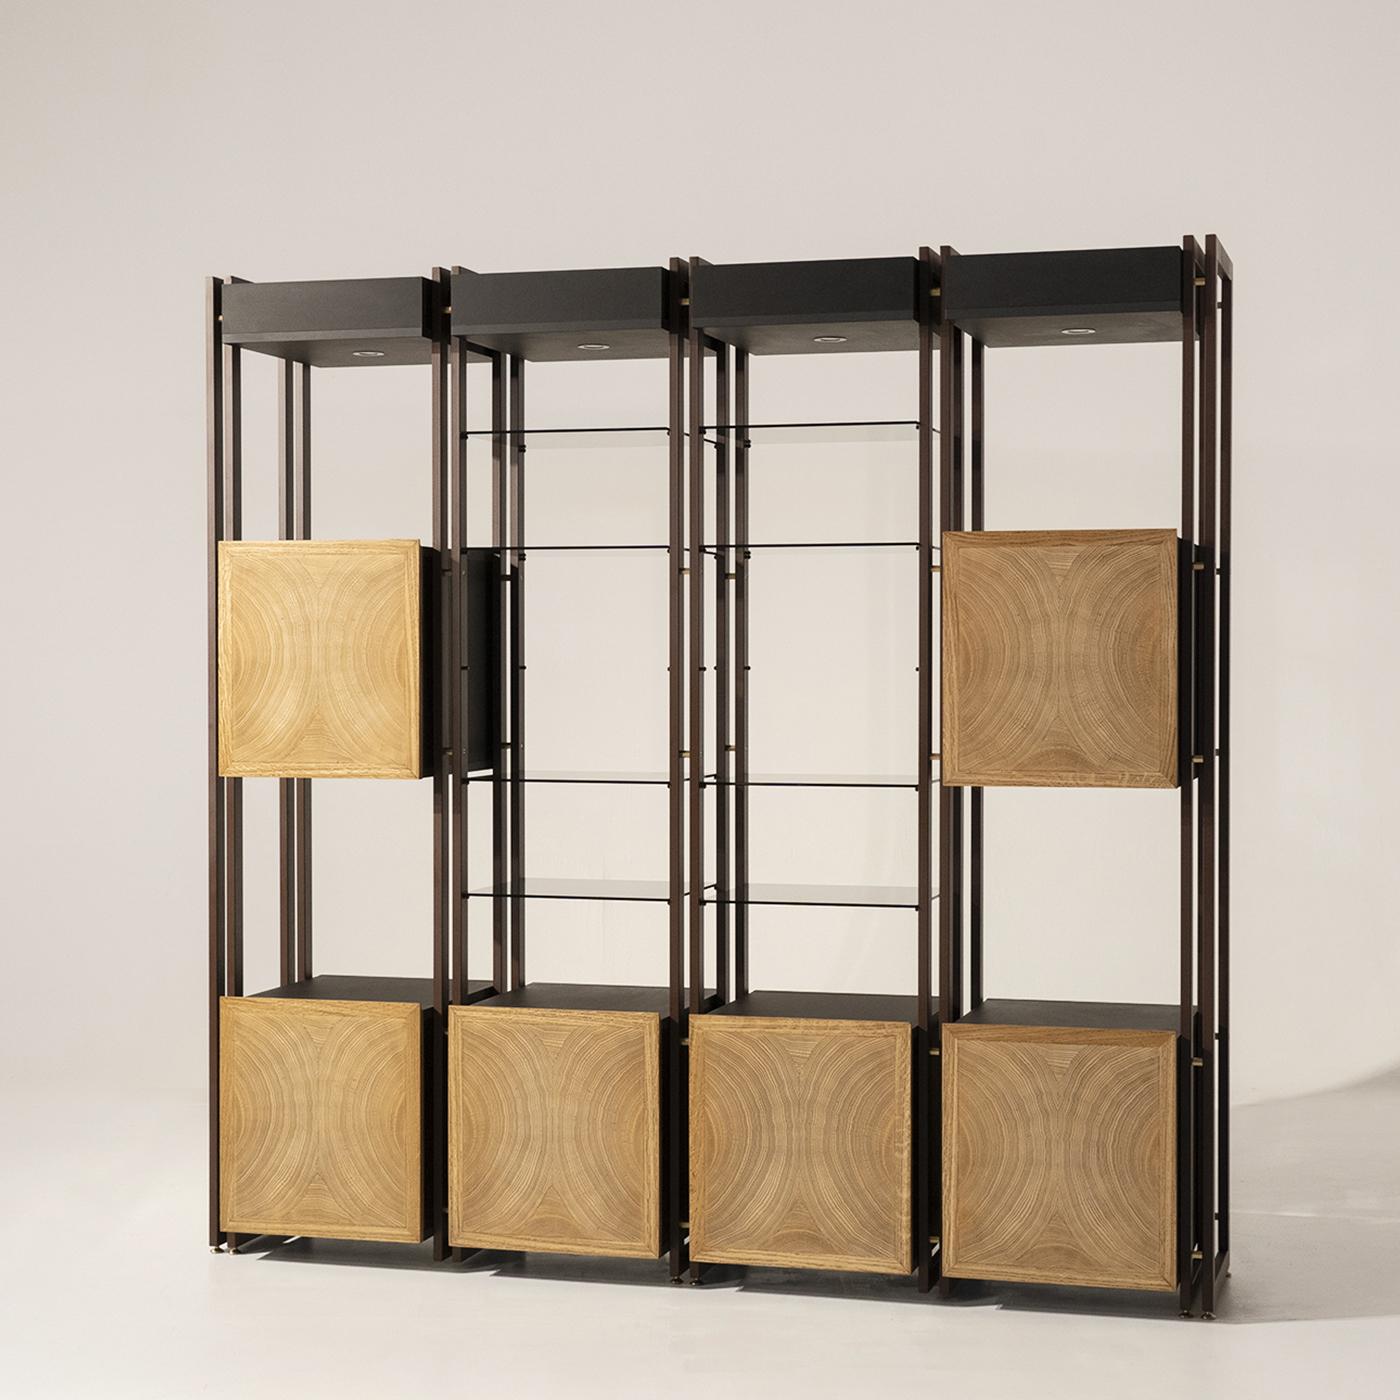 The Tury custom modular bookcase features a clean and linear design and an innovative veneer. The iron corten structure connects via satin brass spacers and the recurring feature within the Tury line is the decorative motif on the doors derived from